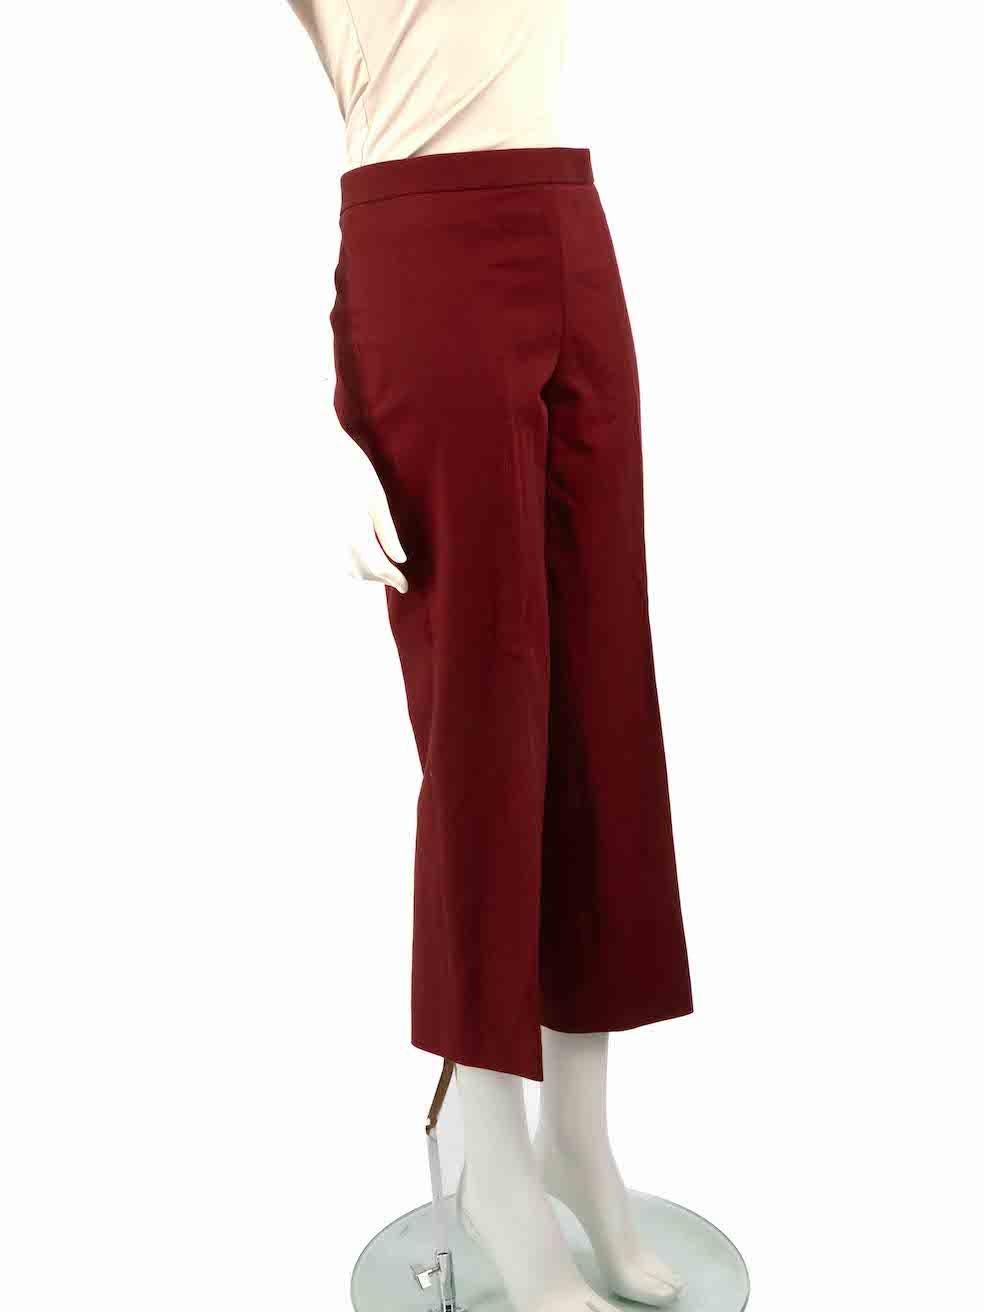 CONDITION is Very good. Minimal wear to trousers is evident. Minimal wear to the left side of the waistband with discoloured mark and composition label becoming detached on this used The Row designer resale item.
 
 
 
 Details
 
 
 Maroon
 
